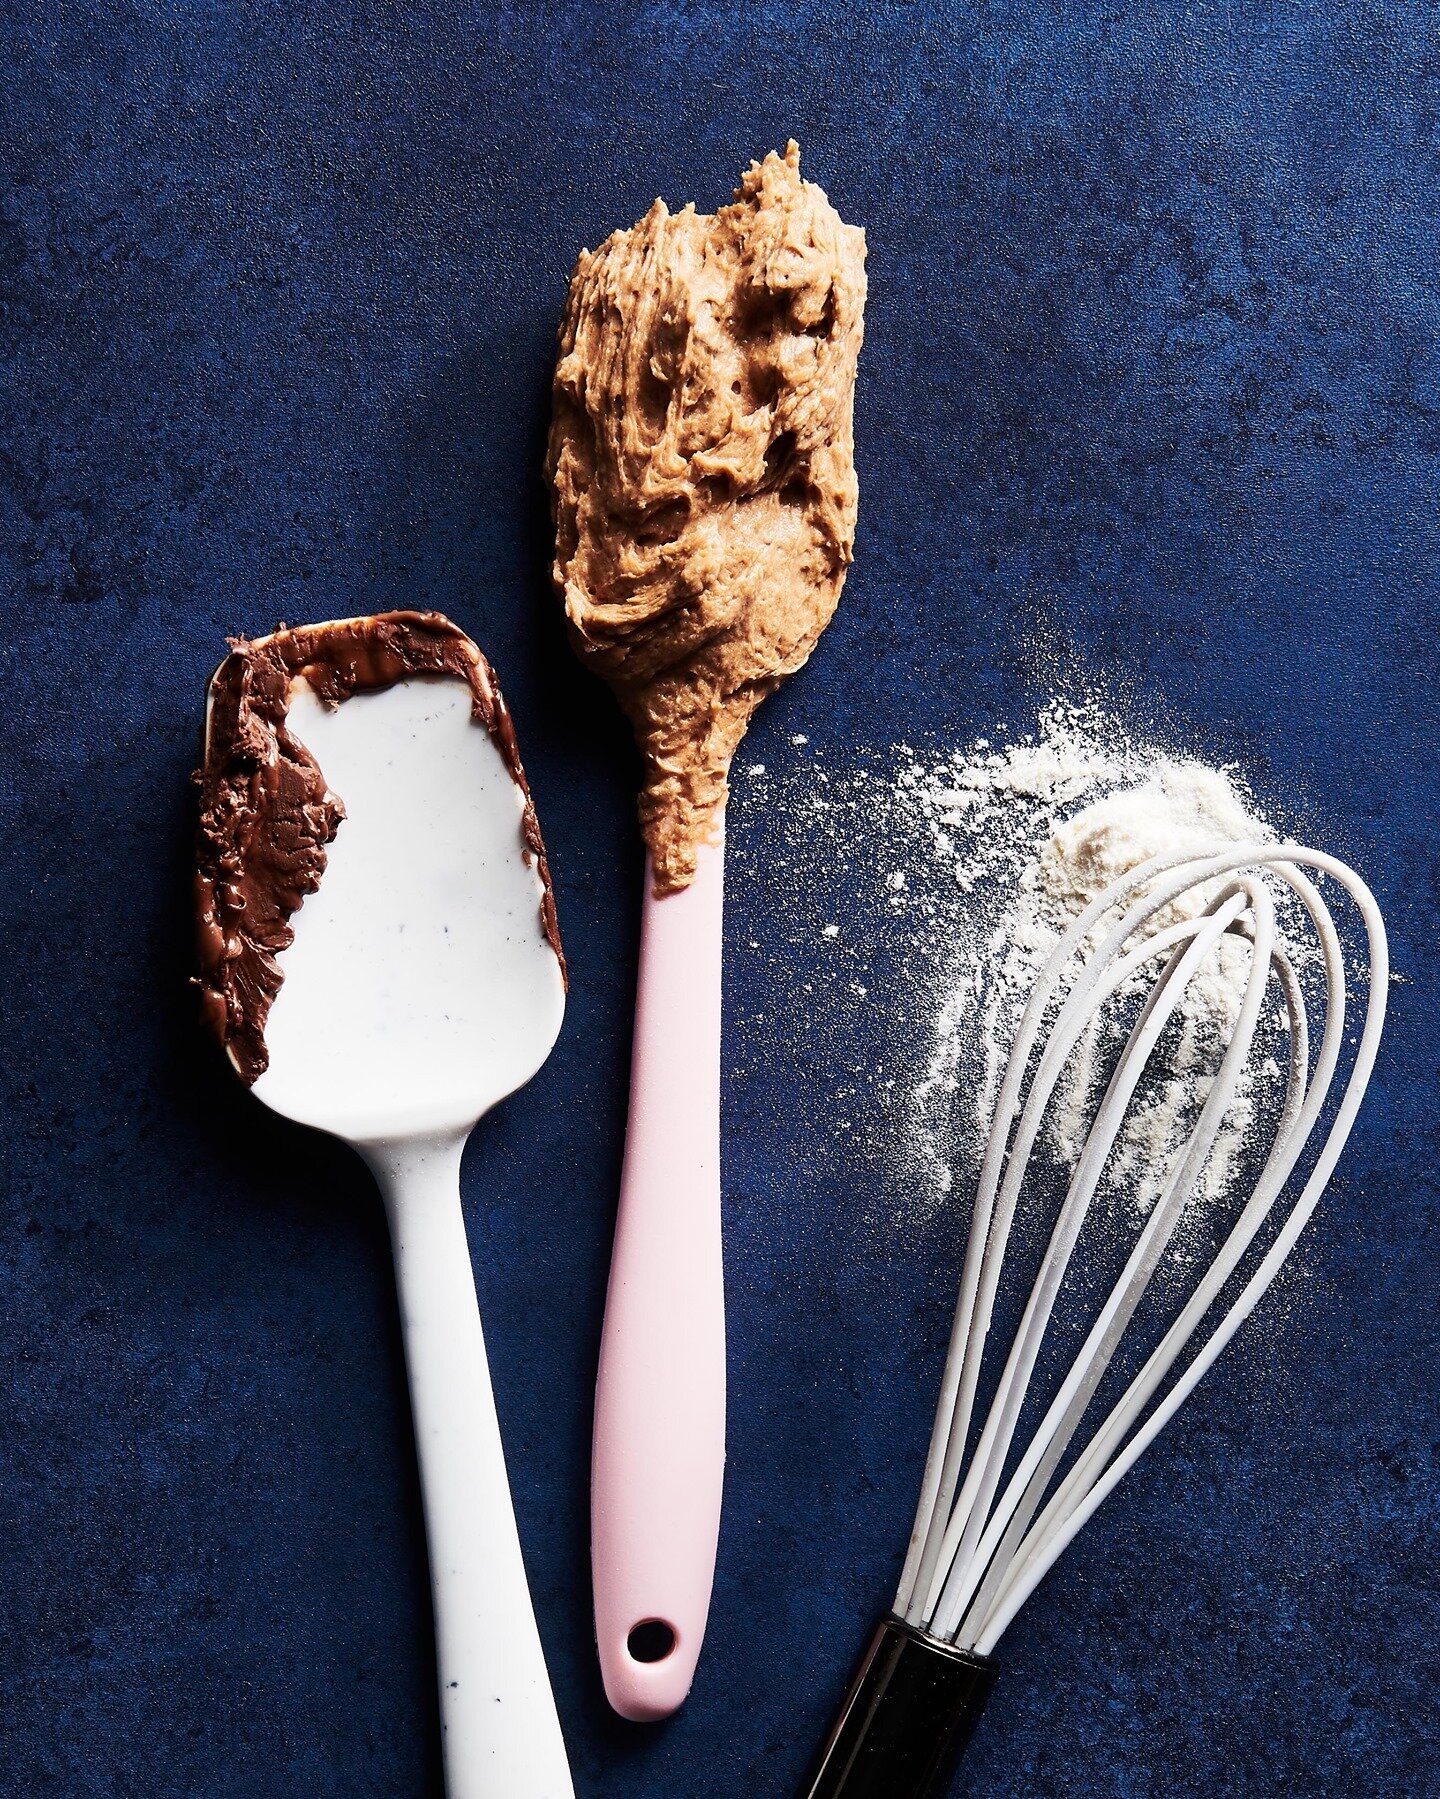 All aspects of baking are pretty to me. The finished shot is obviously the hero, but ingredients are full of beautiful possibilities, process shots are a labor of love, and these dirty spoons look like they'll make someone smile right after the photo